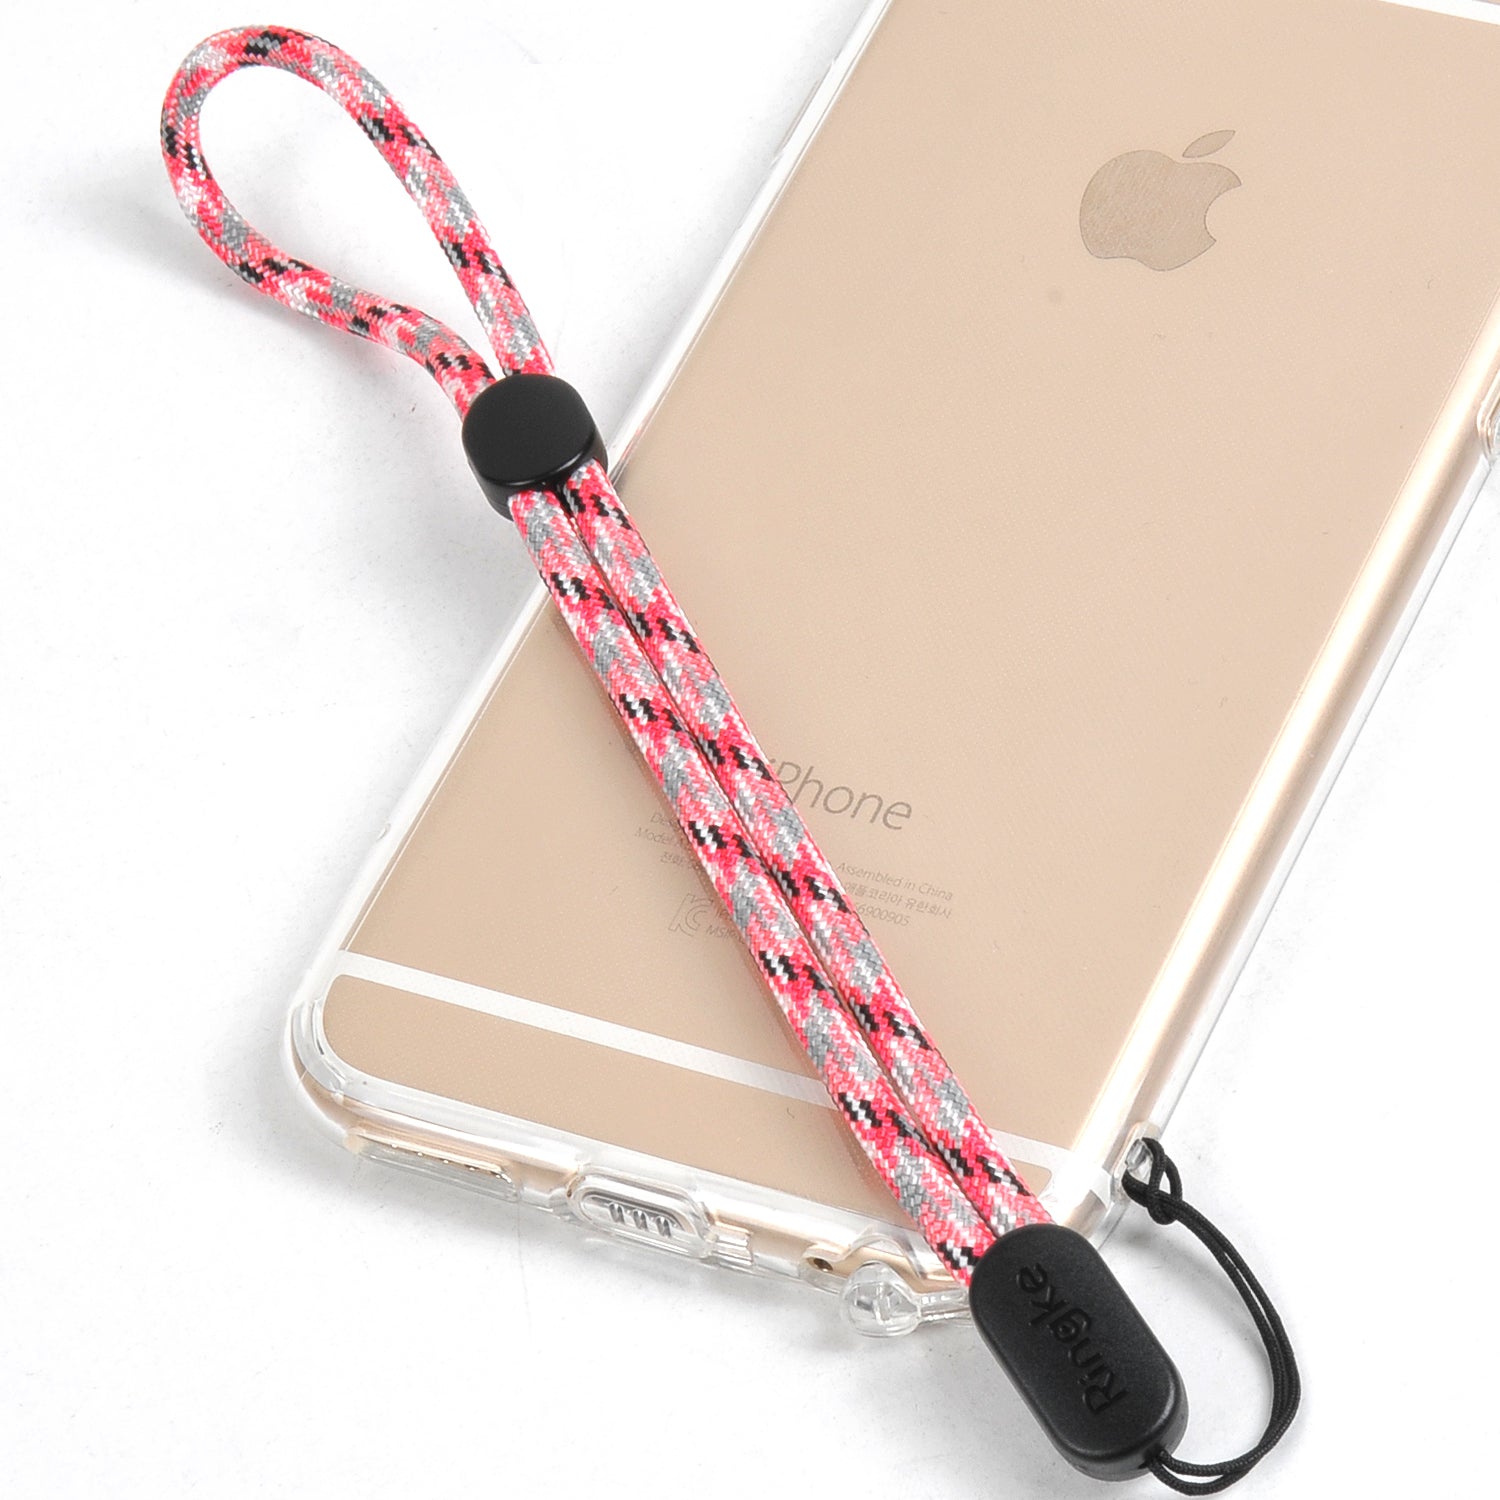 ringke paracord wrist strap pair it with smart phones